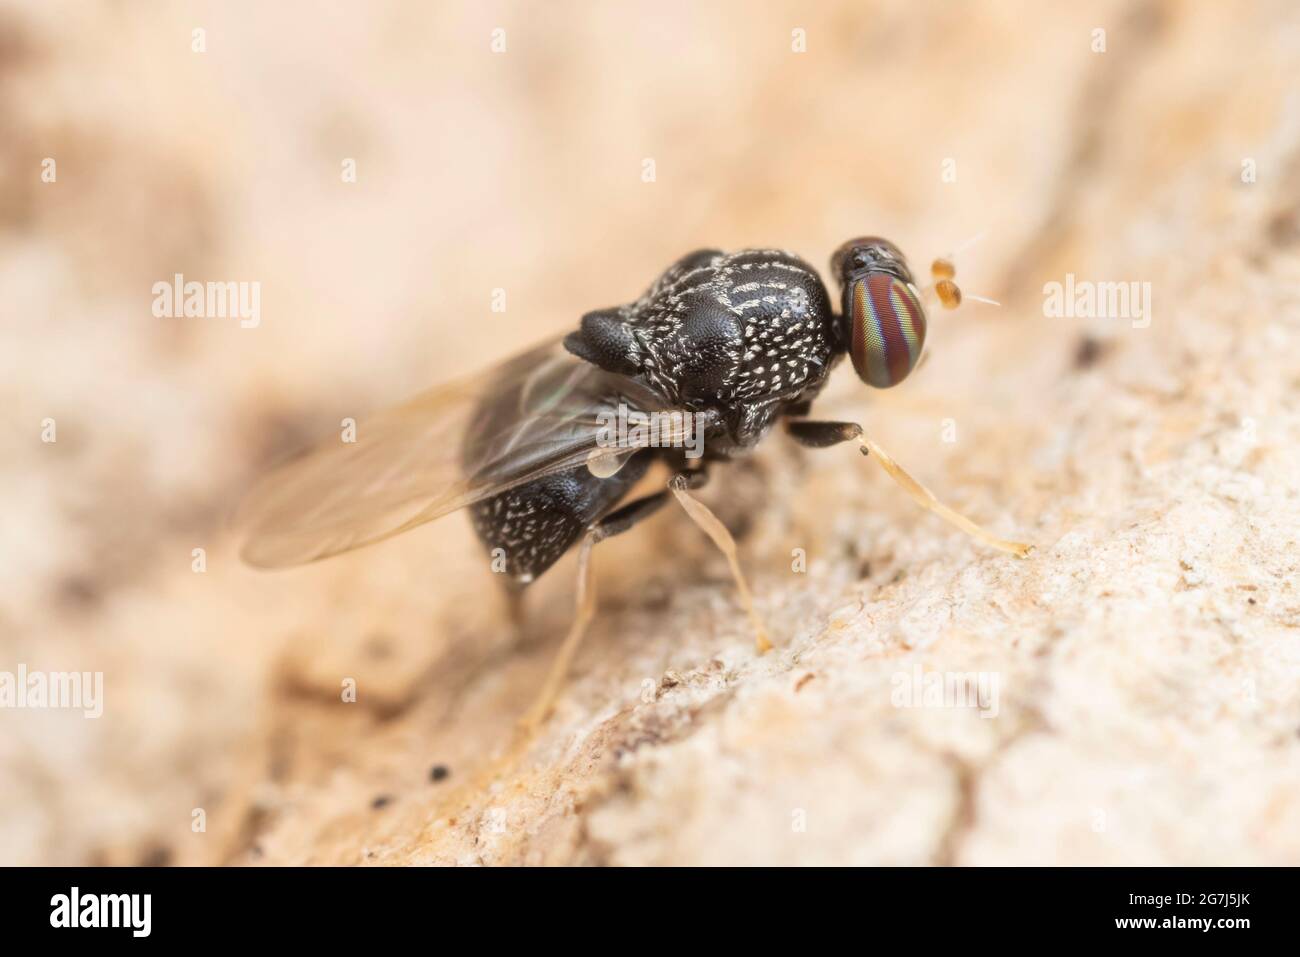 A female Solider Fly (Gowdeyana punctifera) ovipositing on the side of a dead oak tree. Stock Photo